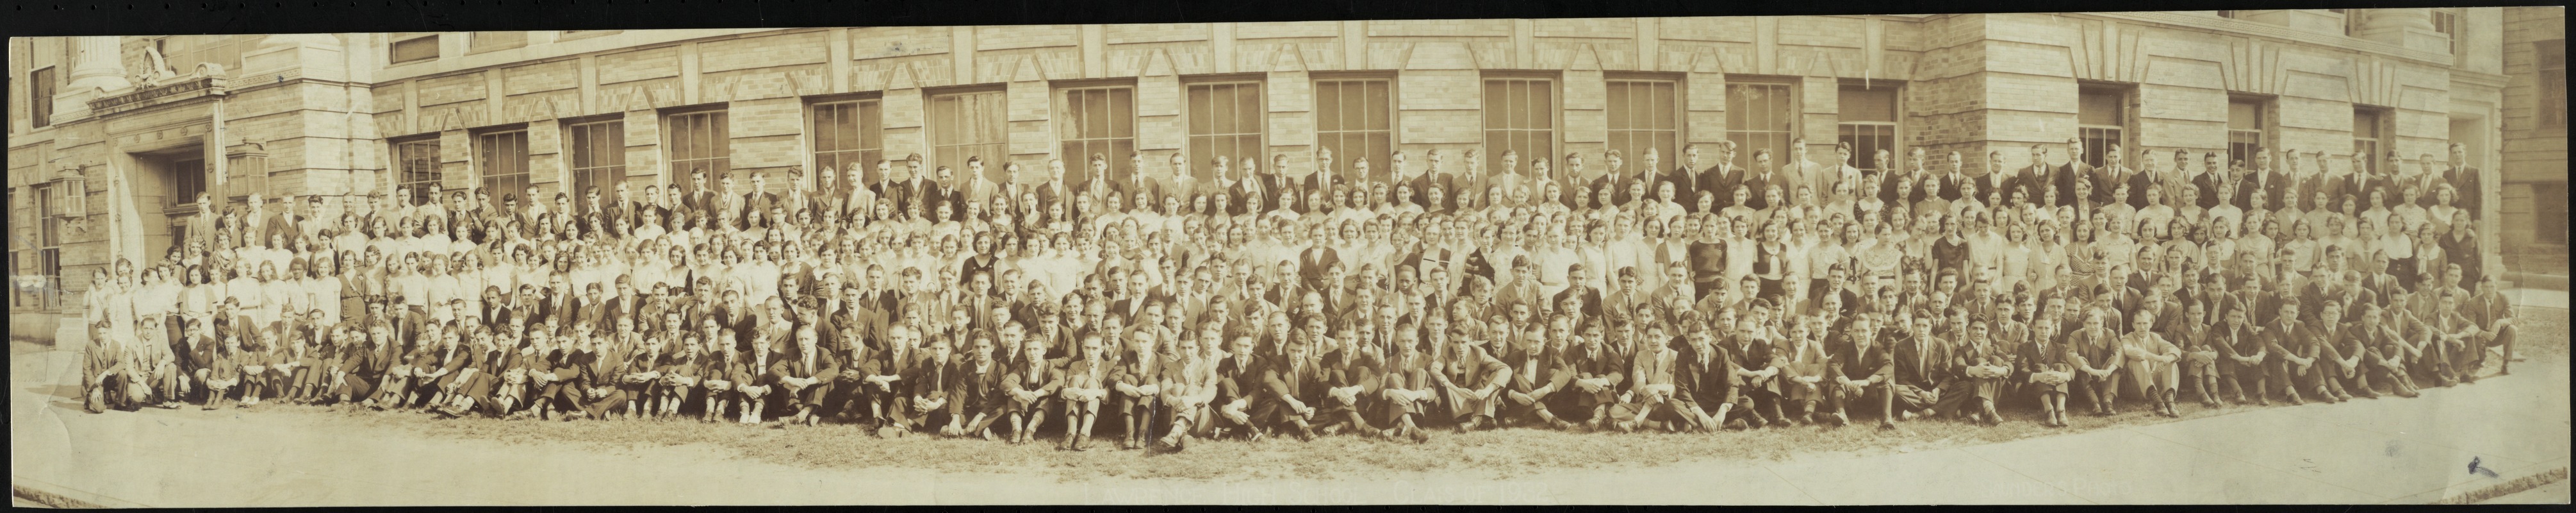 Lawrence High School class of 1932